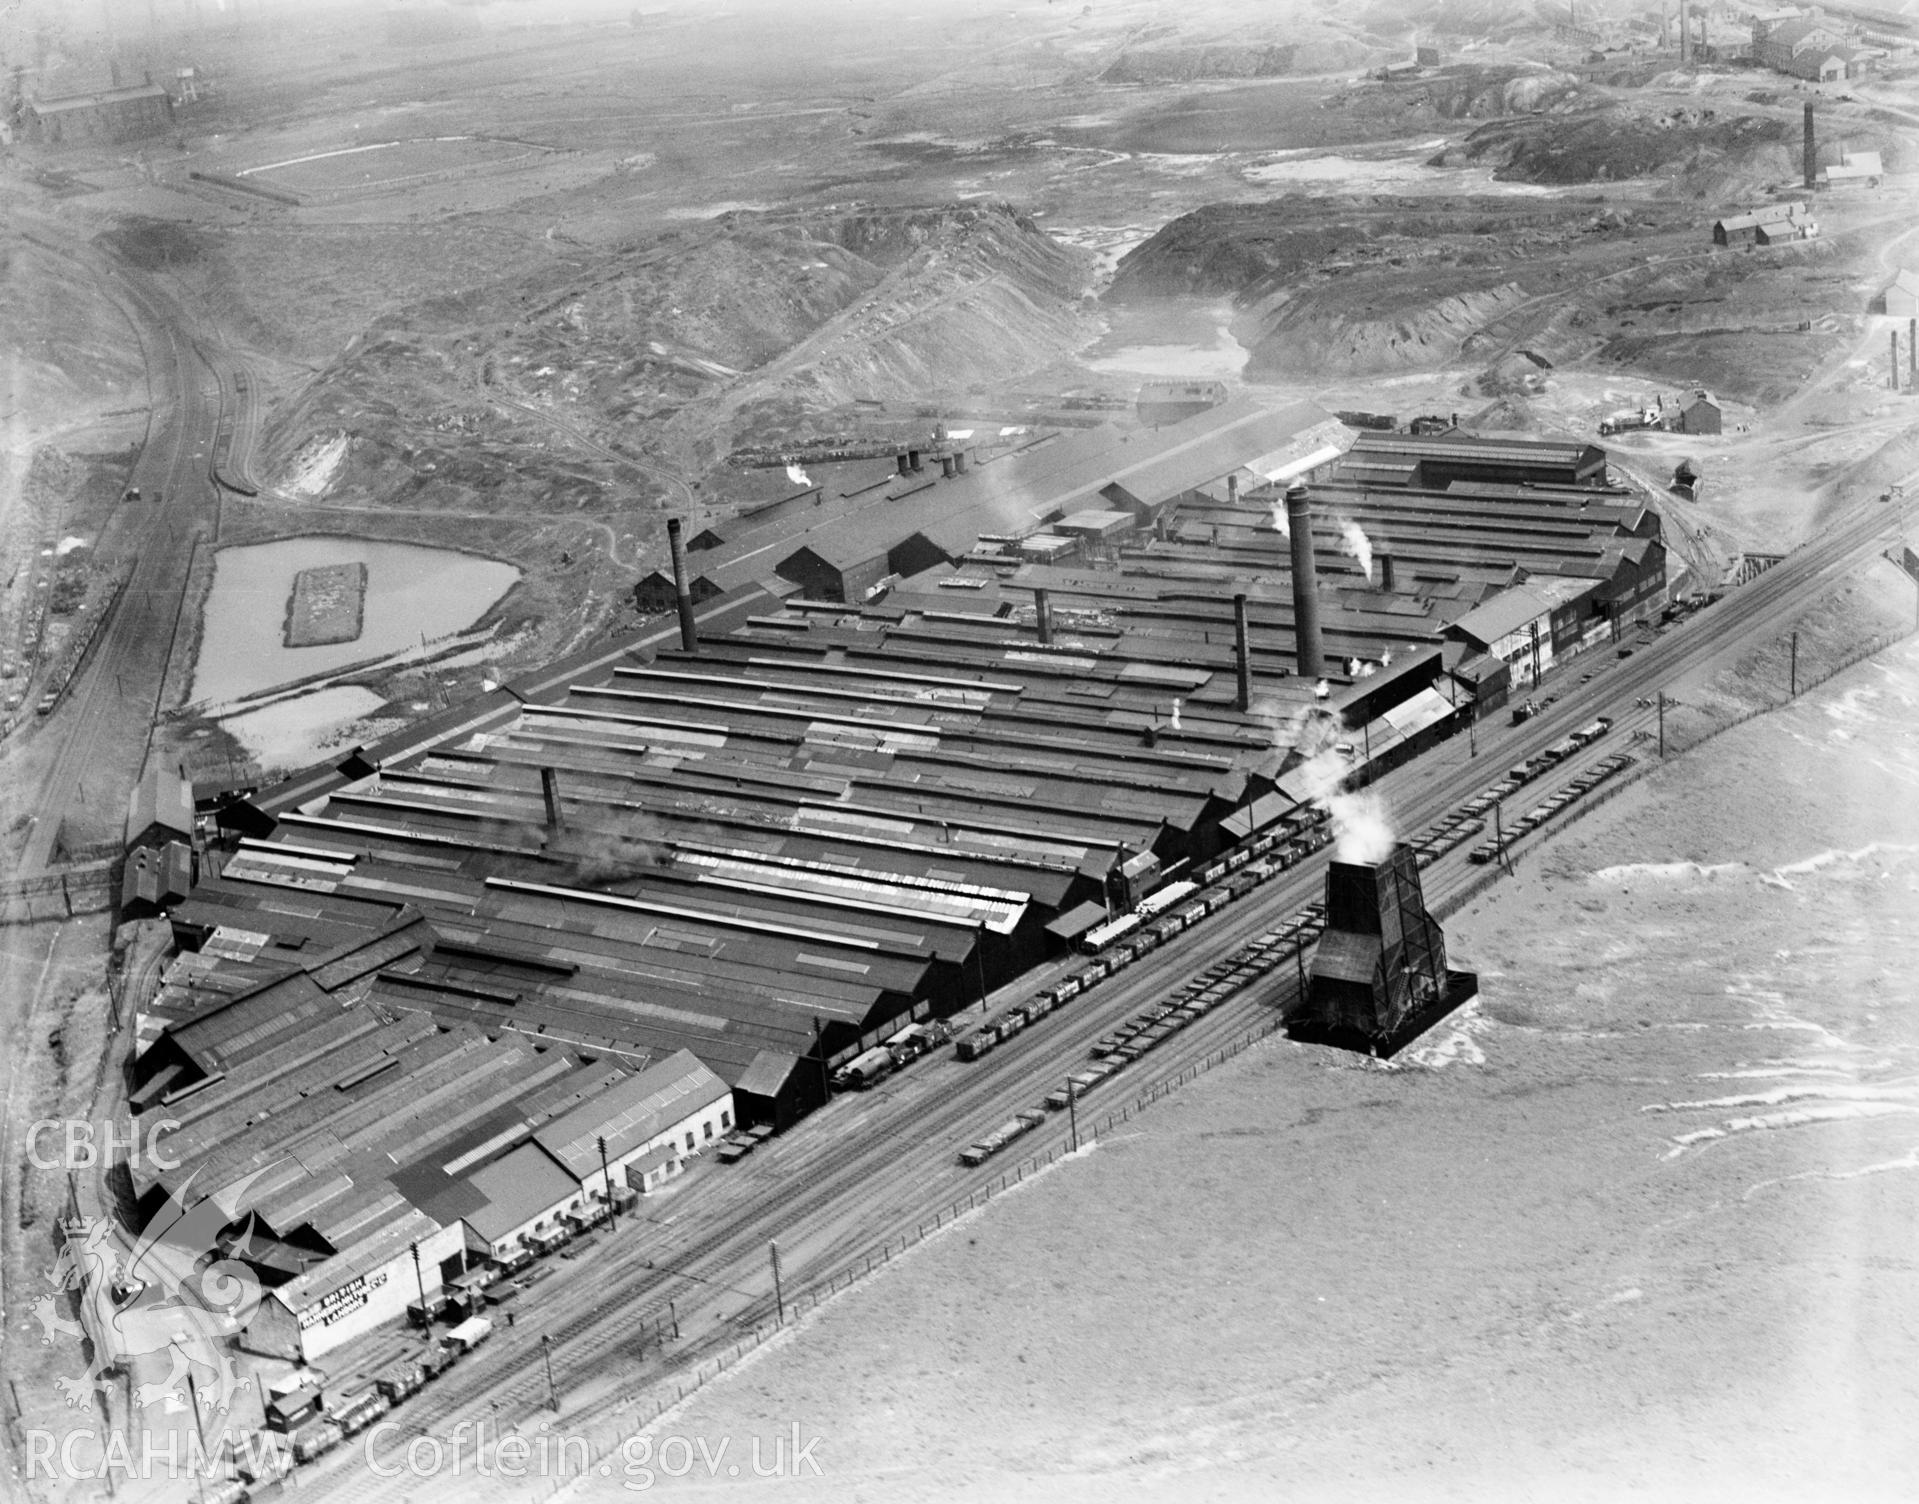 View of the British Mannesmann Tube Co., Landore, Swansea, oblique aerial view. 5?x4? black and white glass plate negative.